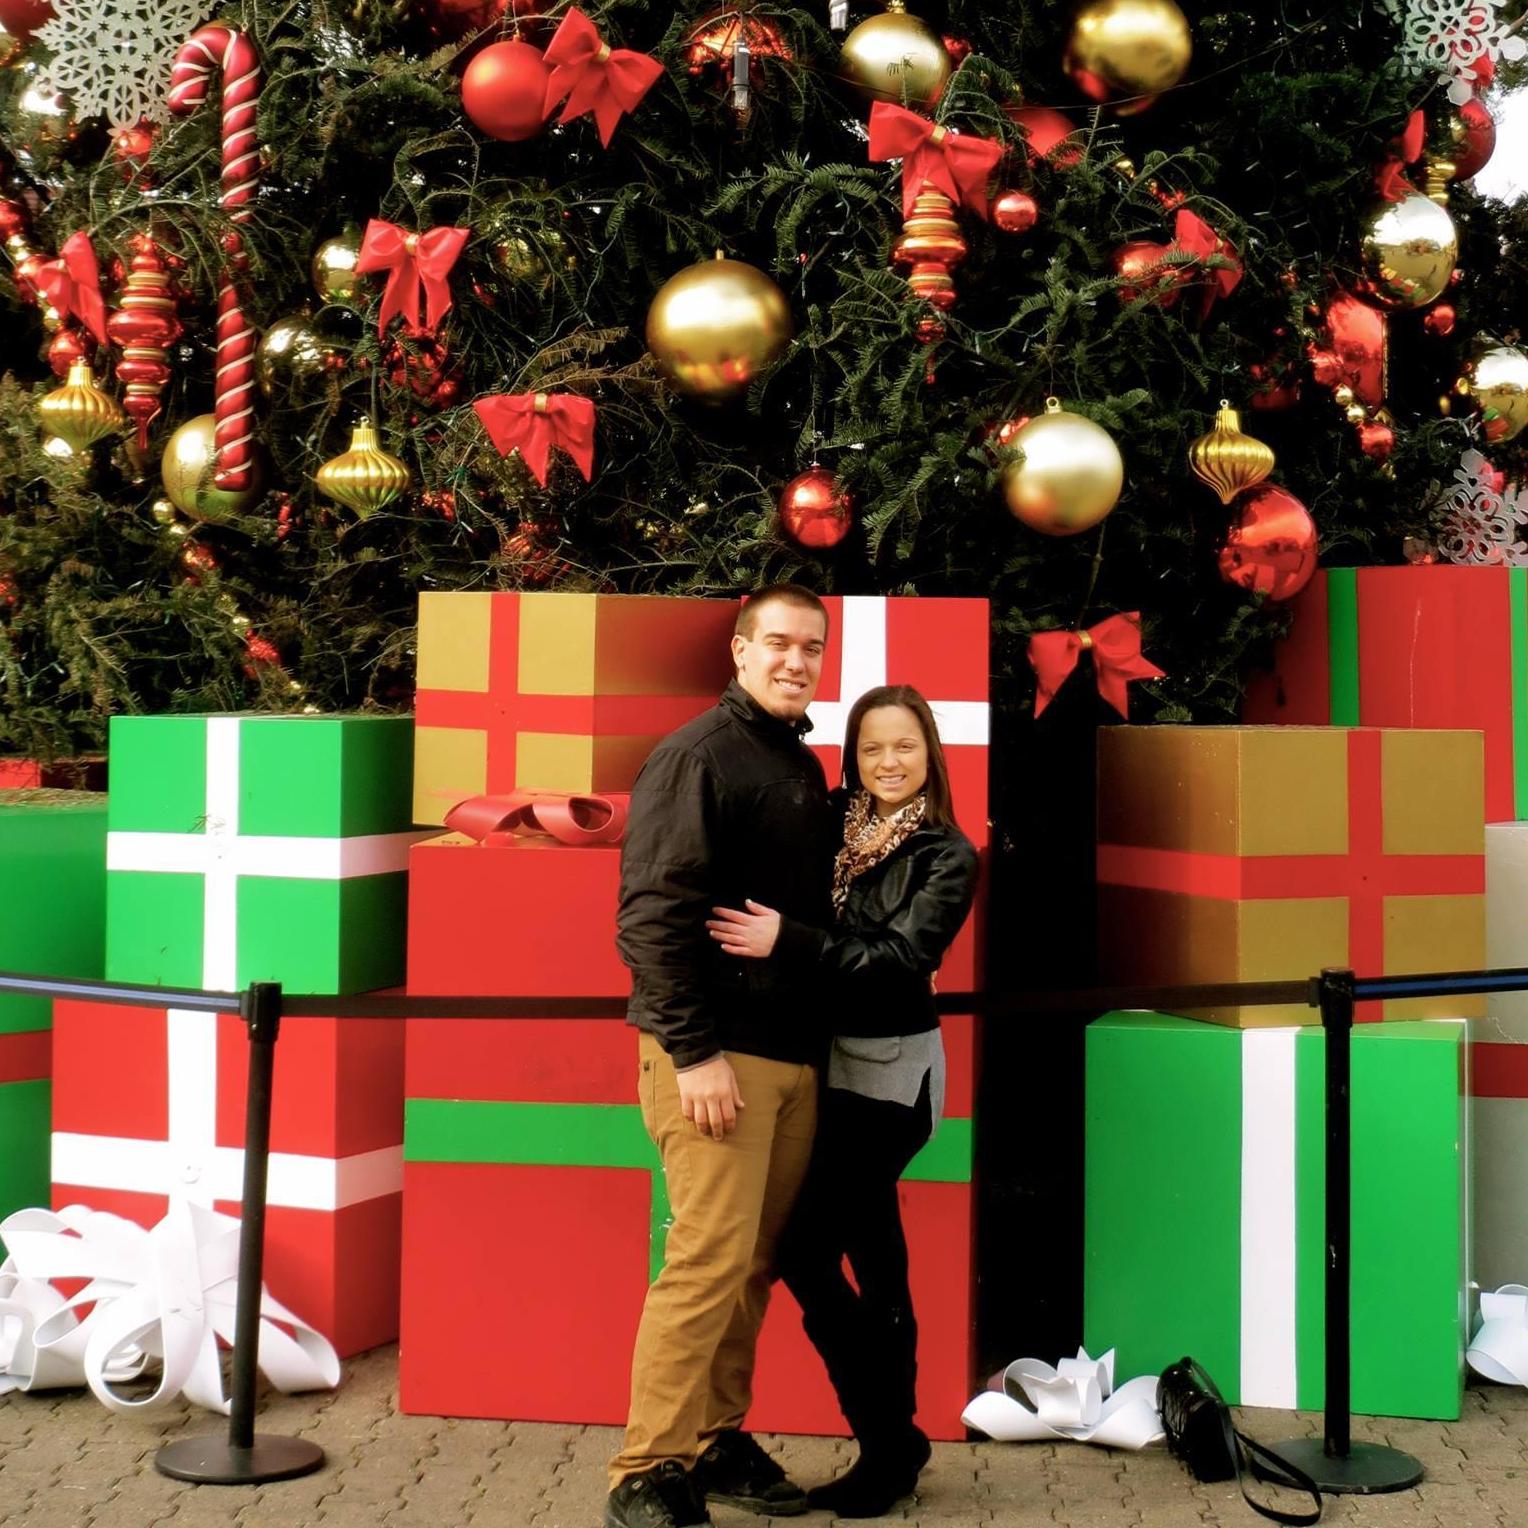 Christmas time at PIER 39. One of our many getaways to California together